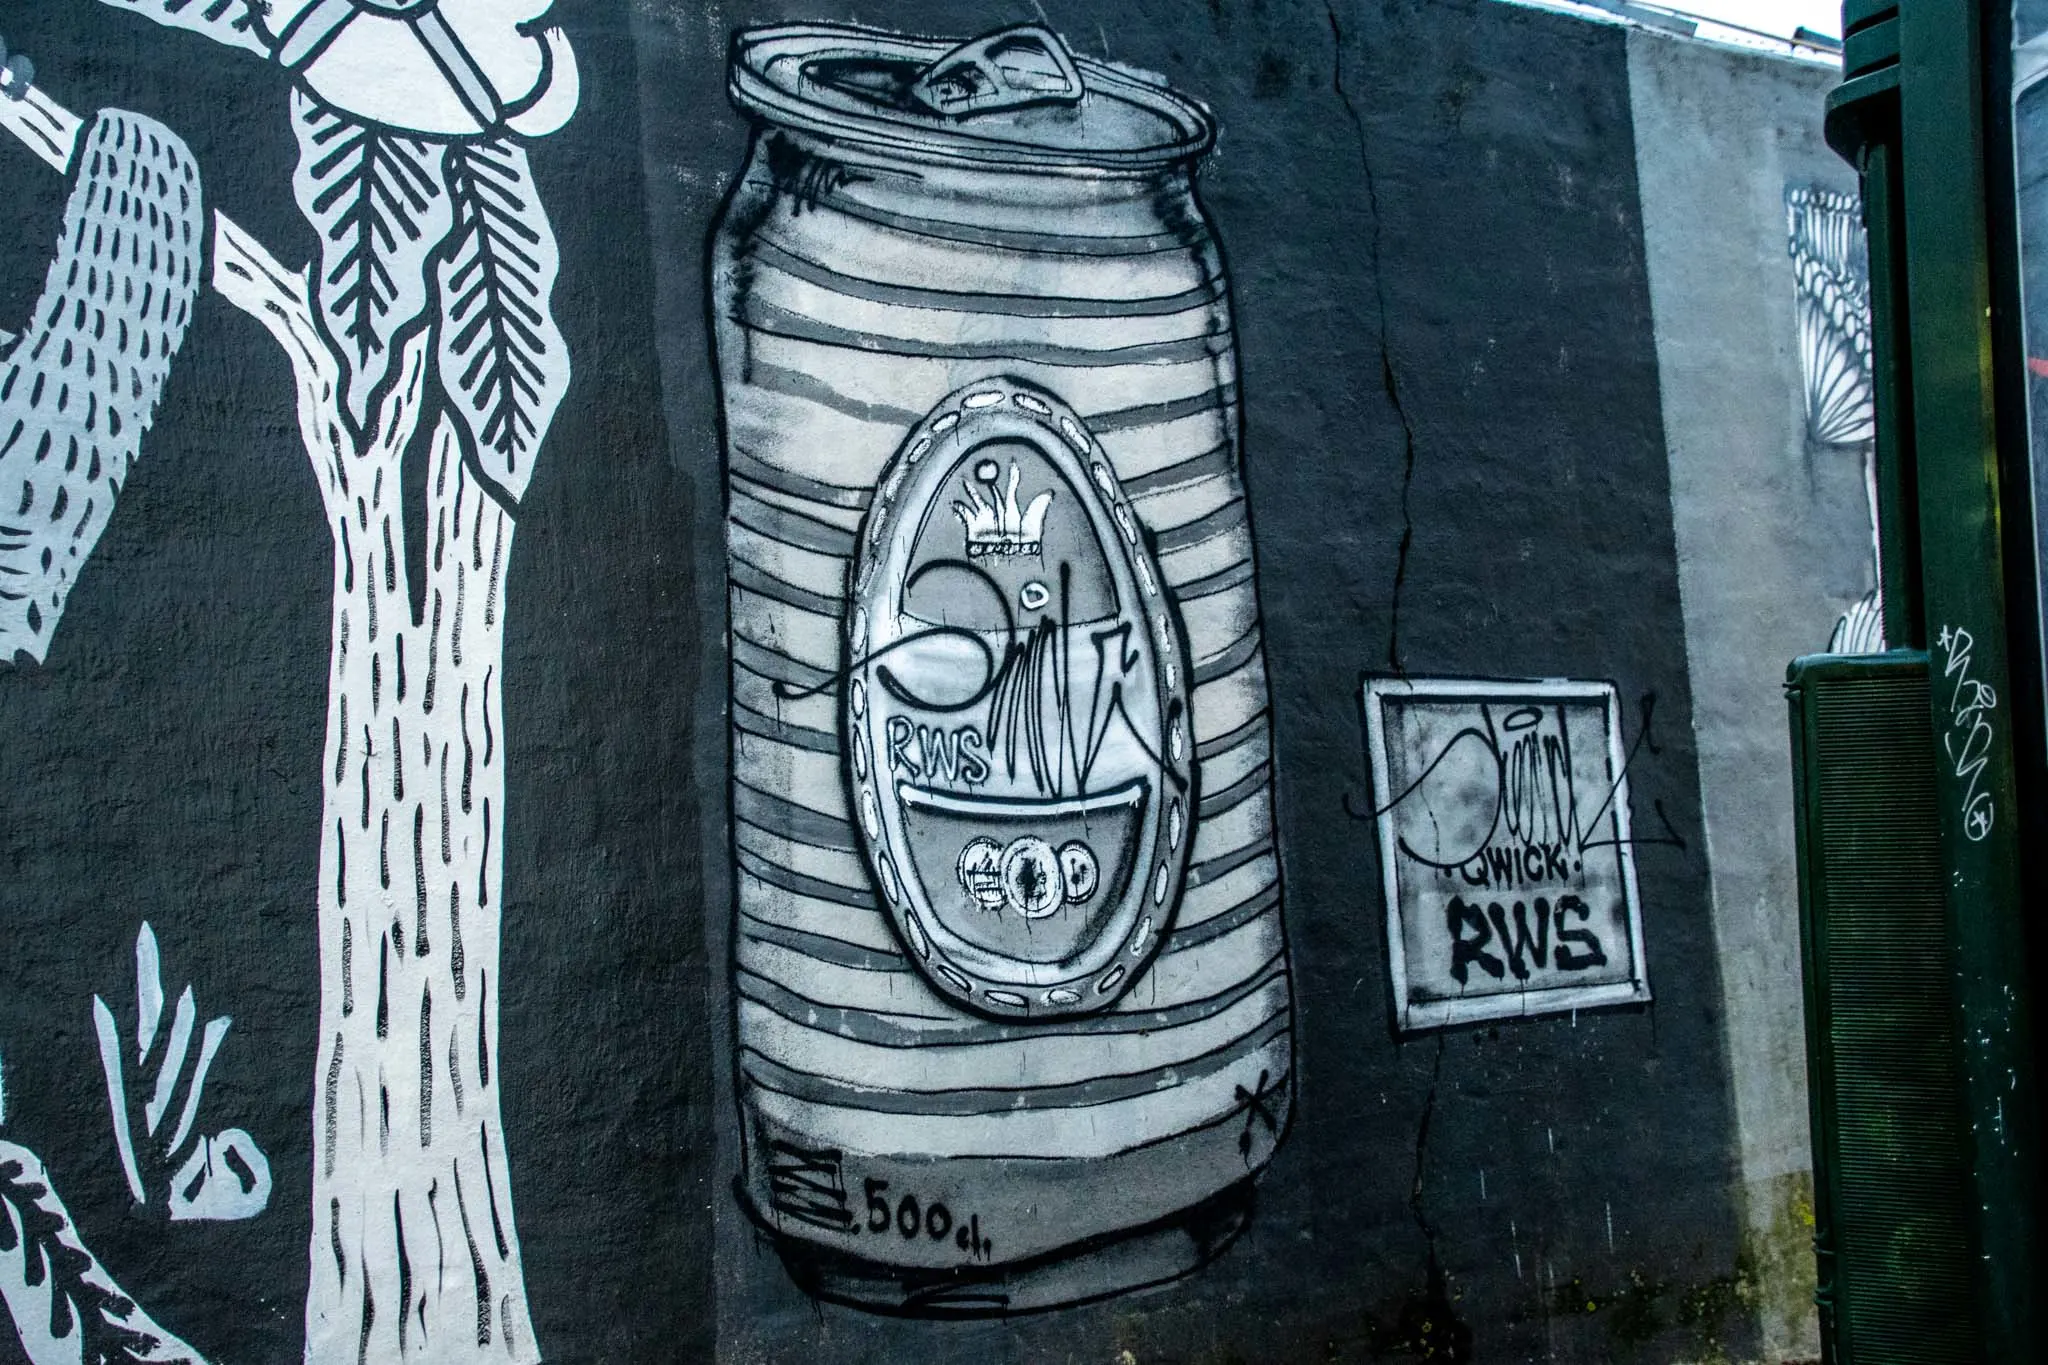 Street murals like this beer can are temporary